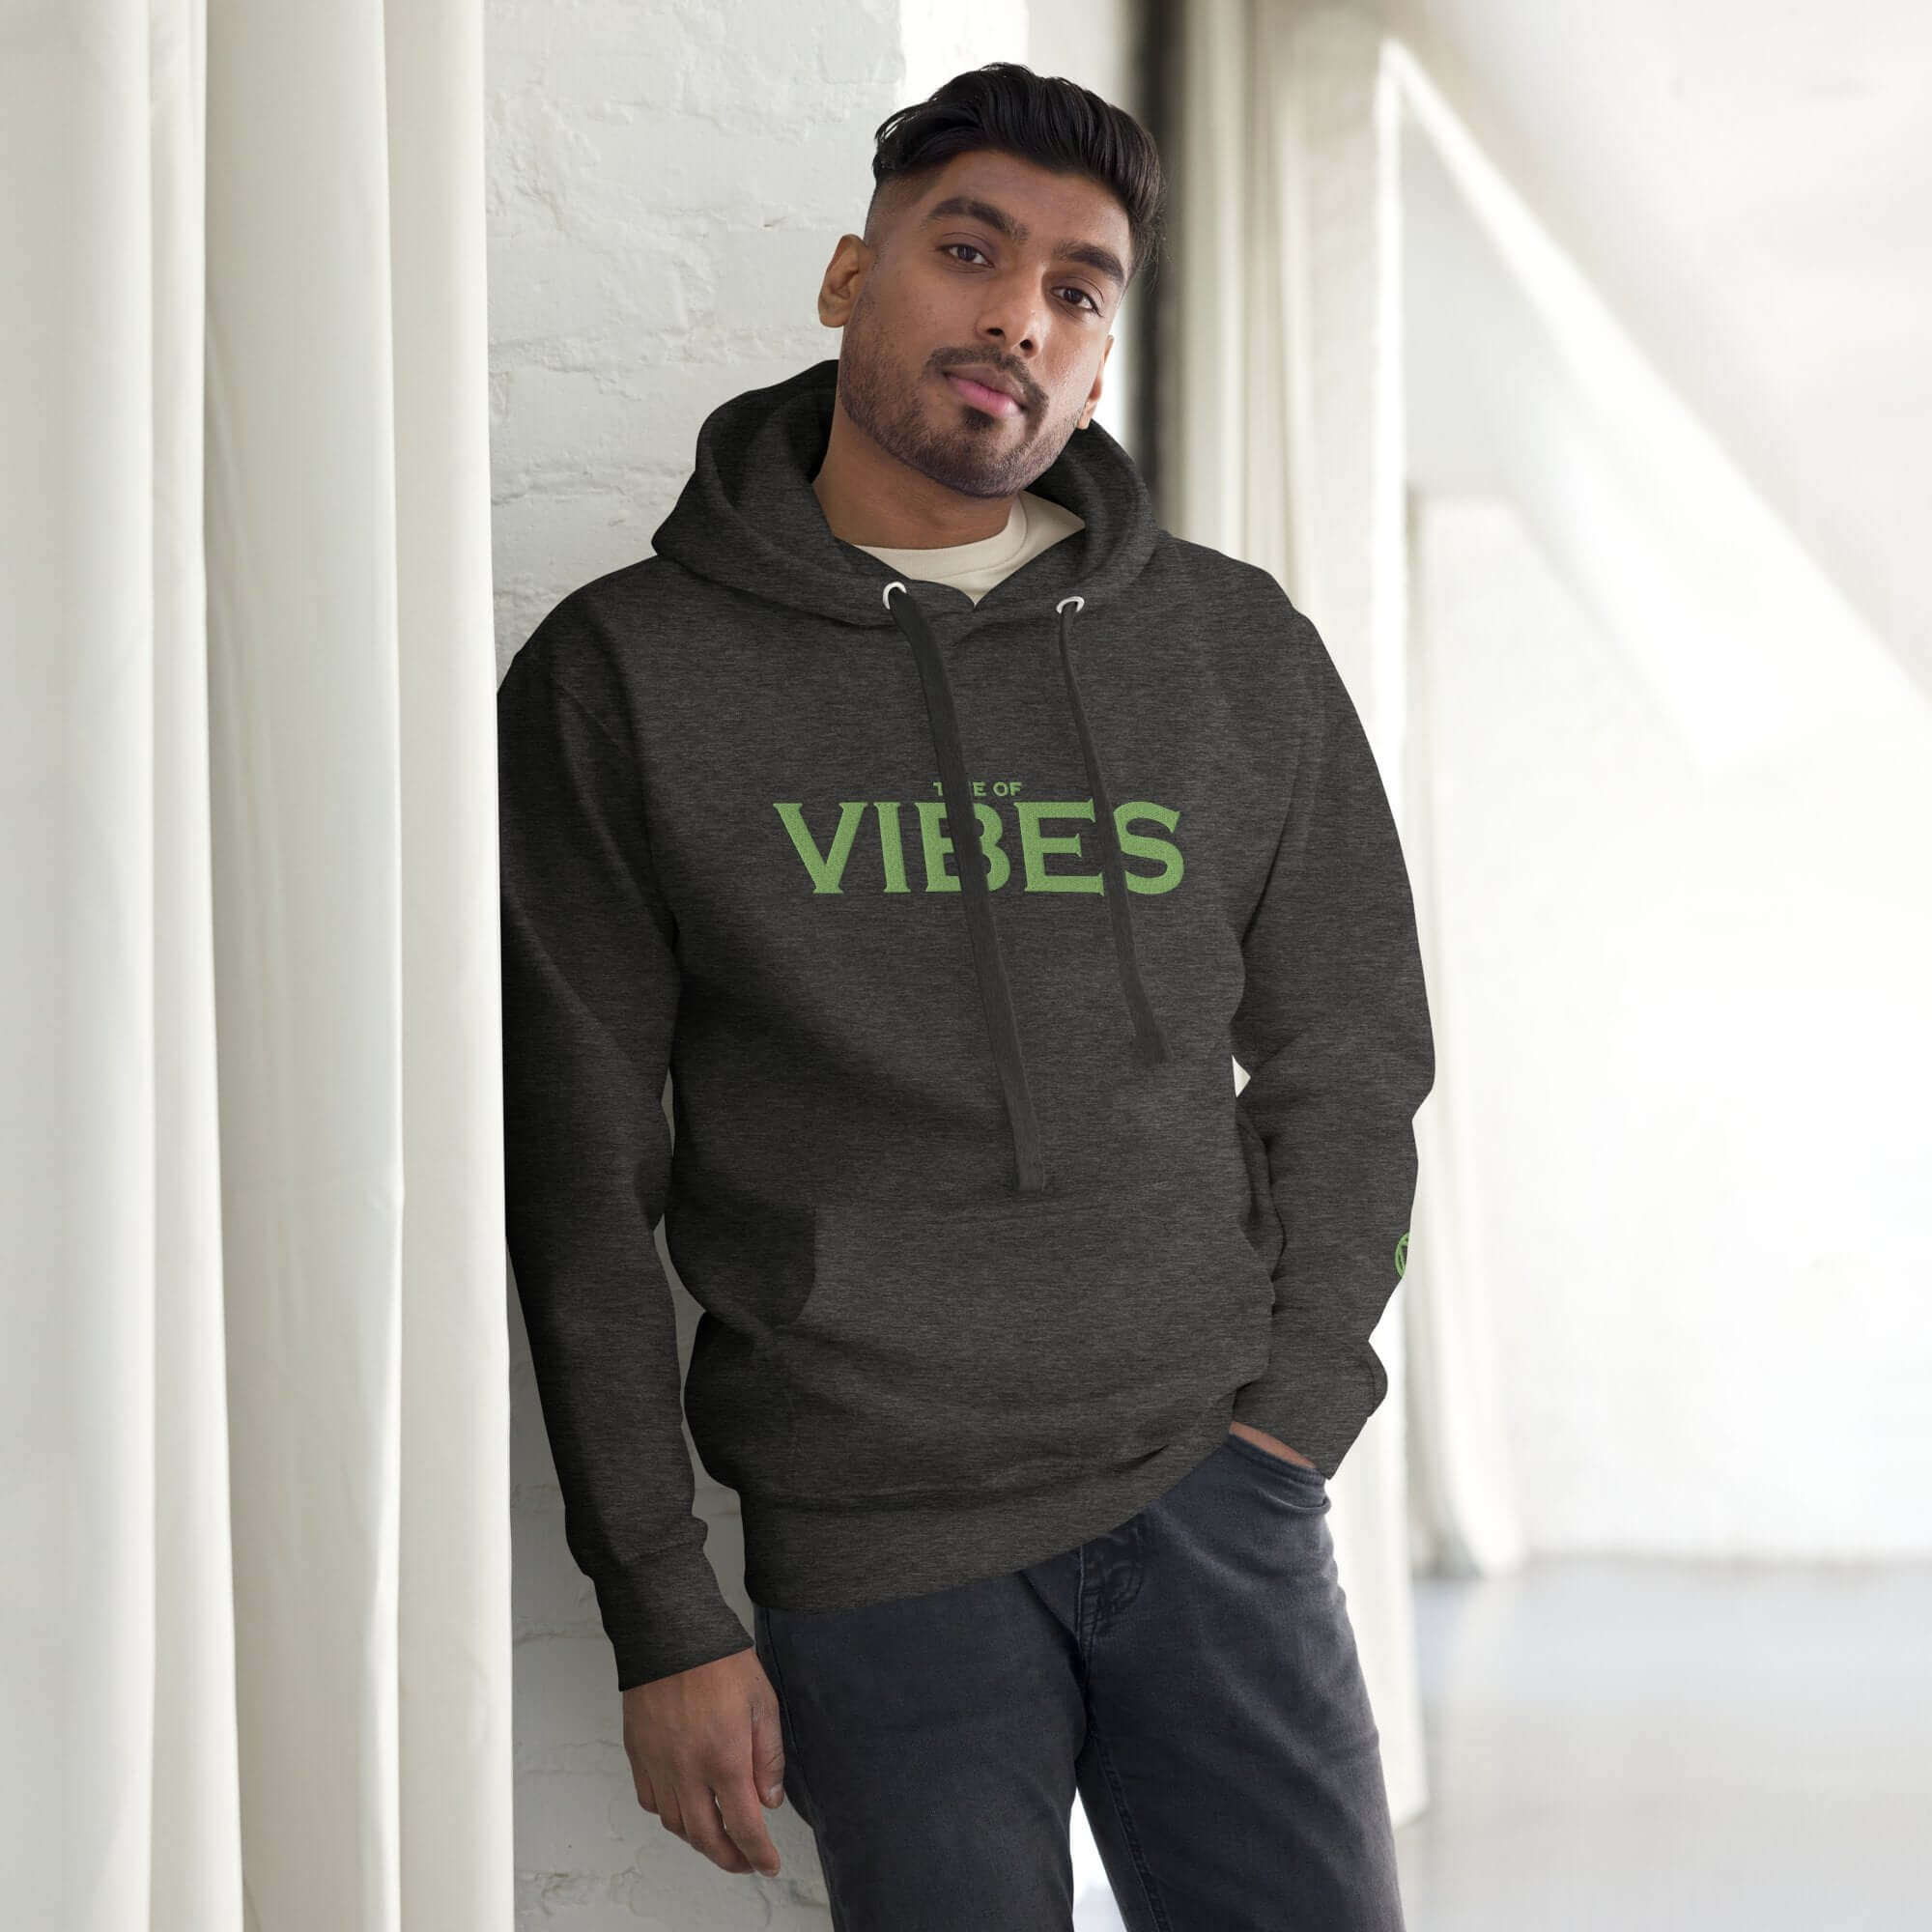 TIME OF VIBES - Sweater/Hoodies Men